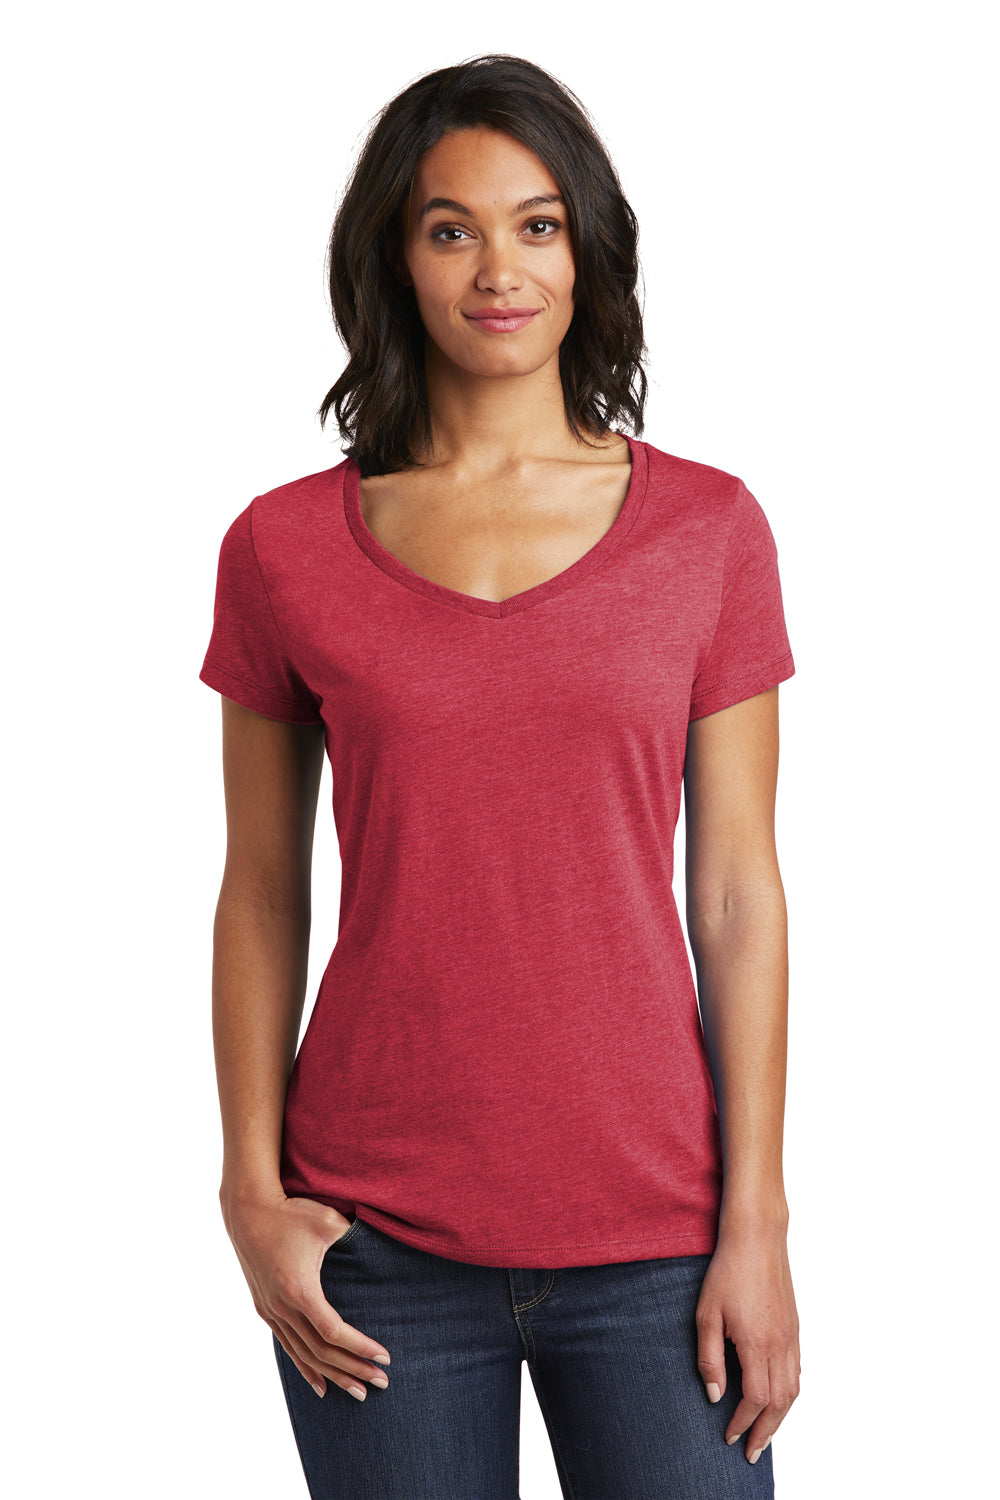 District DT6503 Womens Very Important Short Sleeve V-Neck T-Shirt Heather Red Front